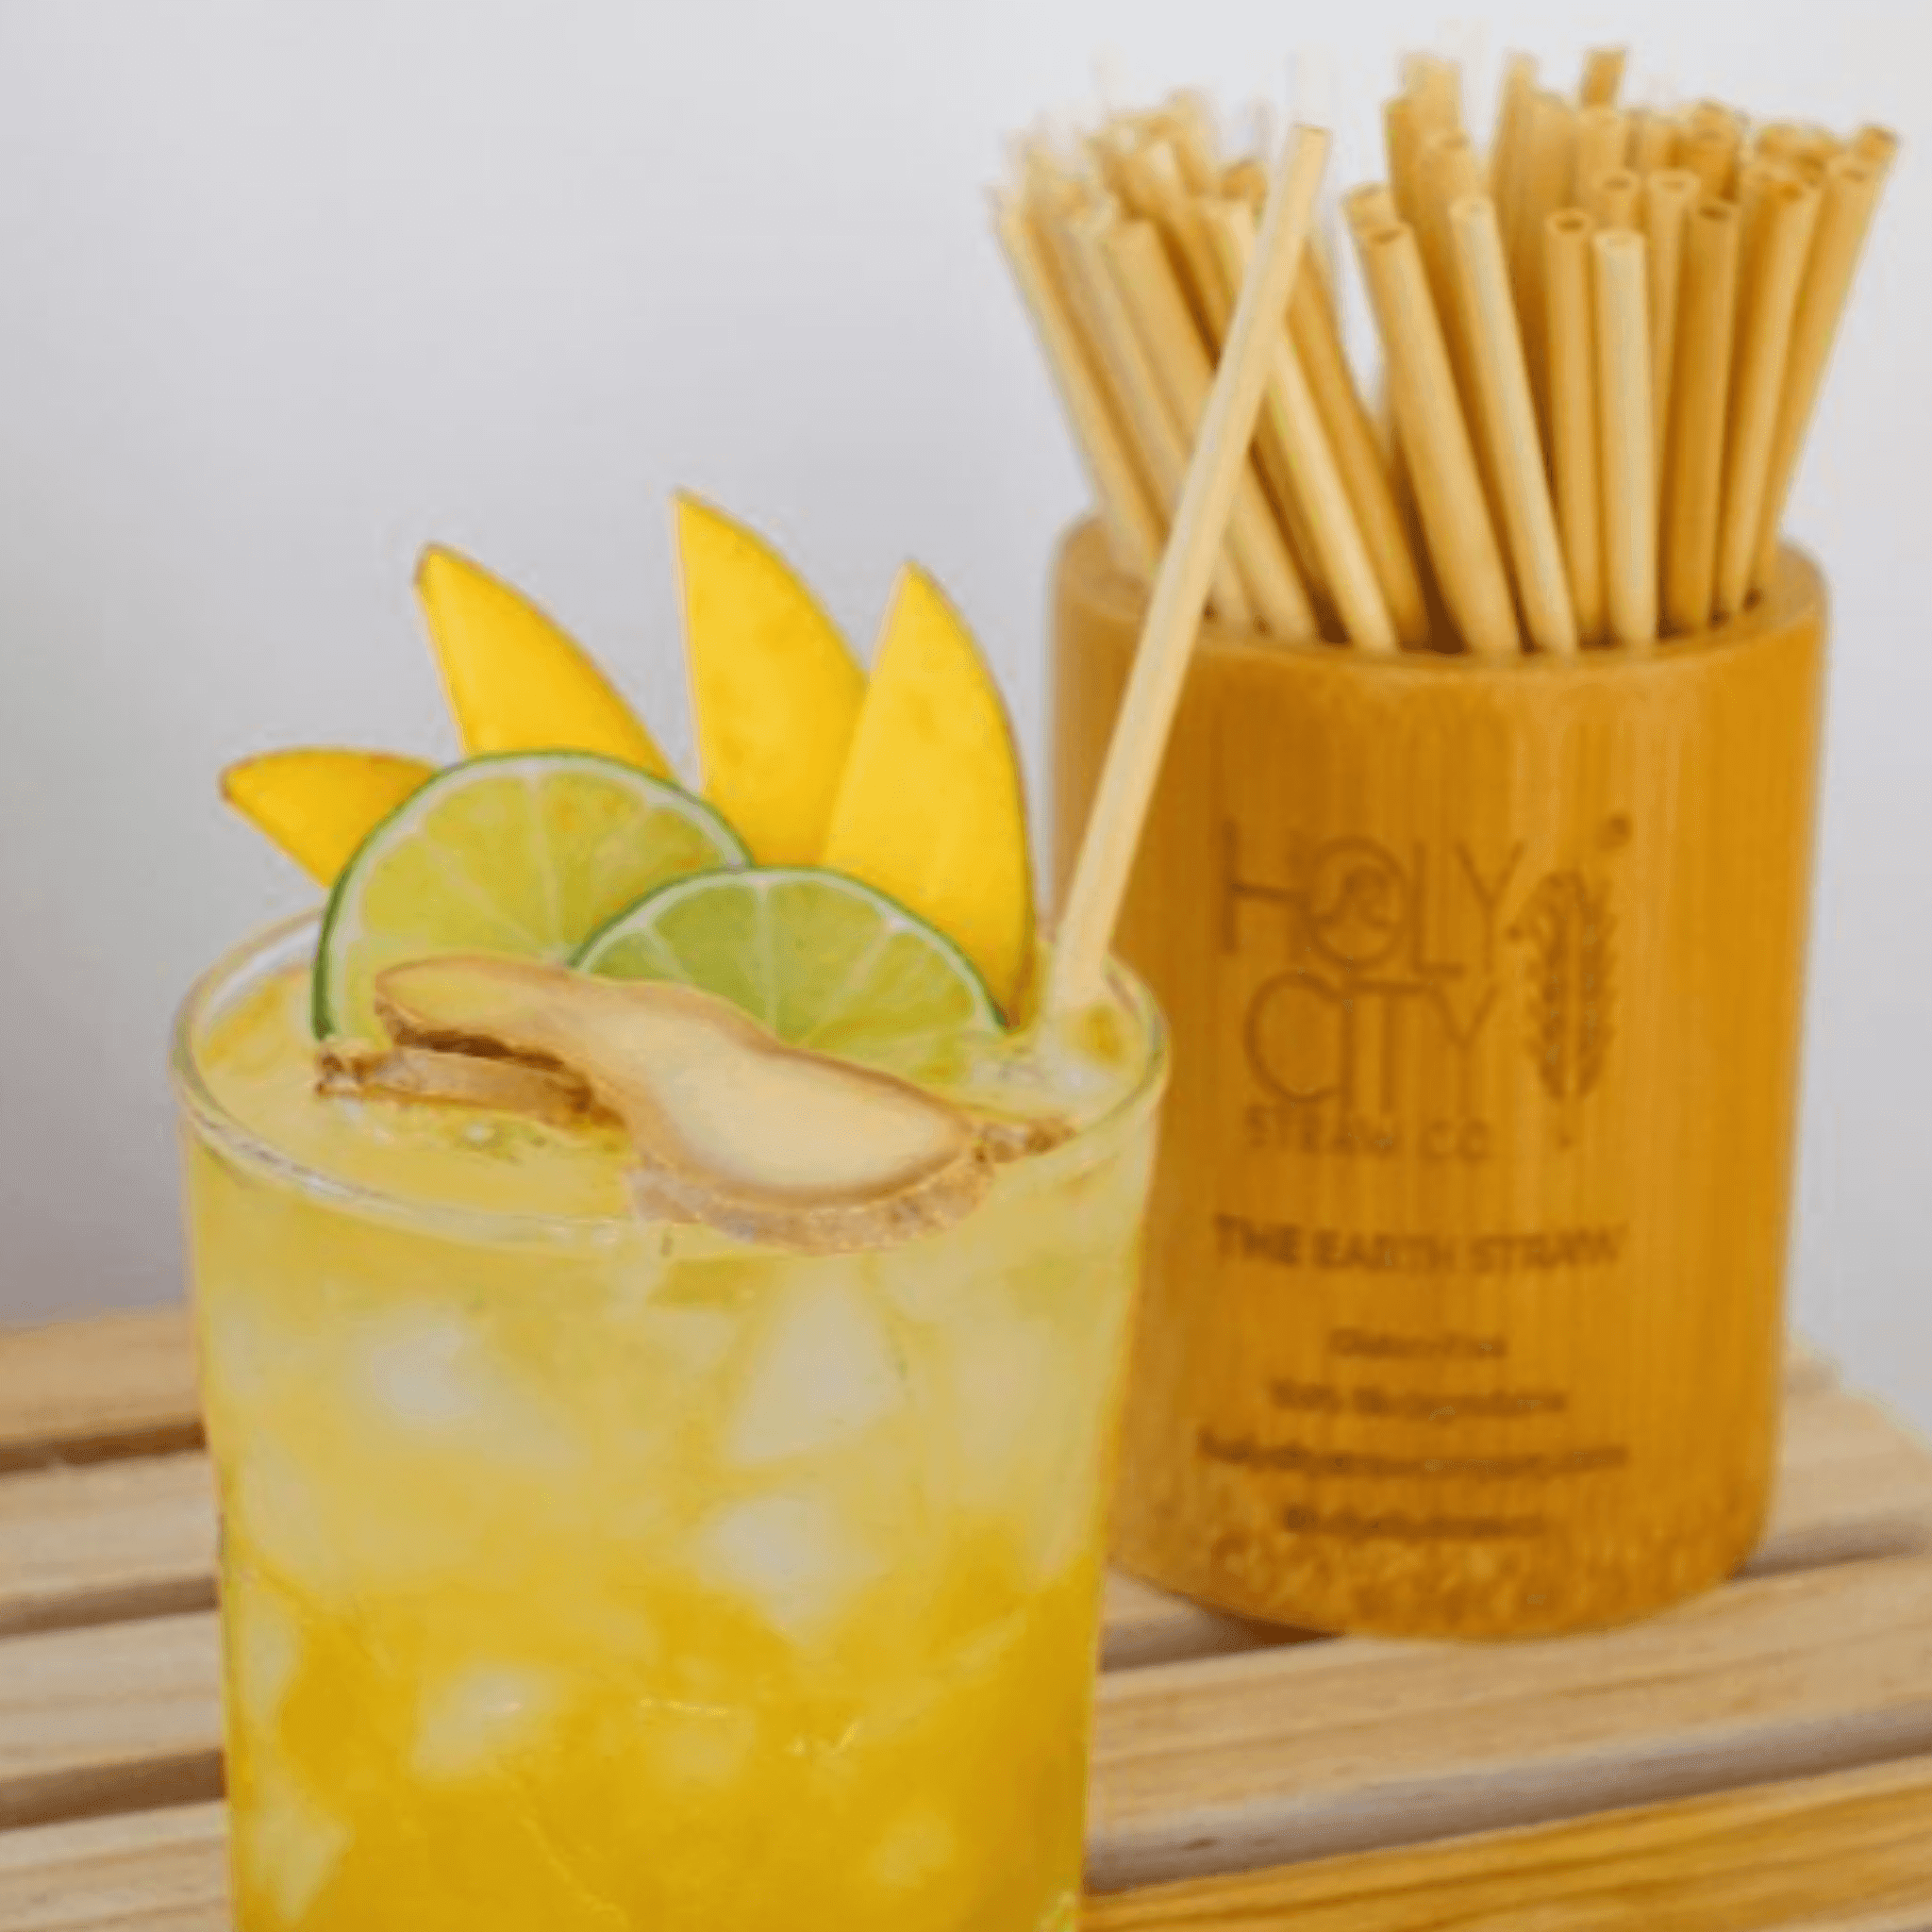 Holy City Straw Company Branded small Bamboo Straw Holder next to citrus drink